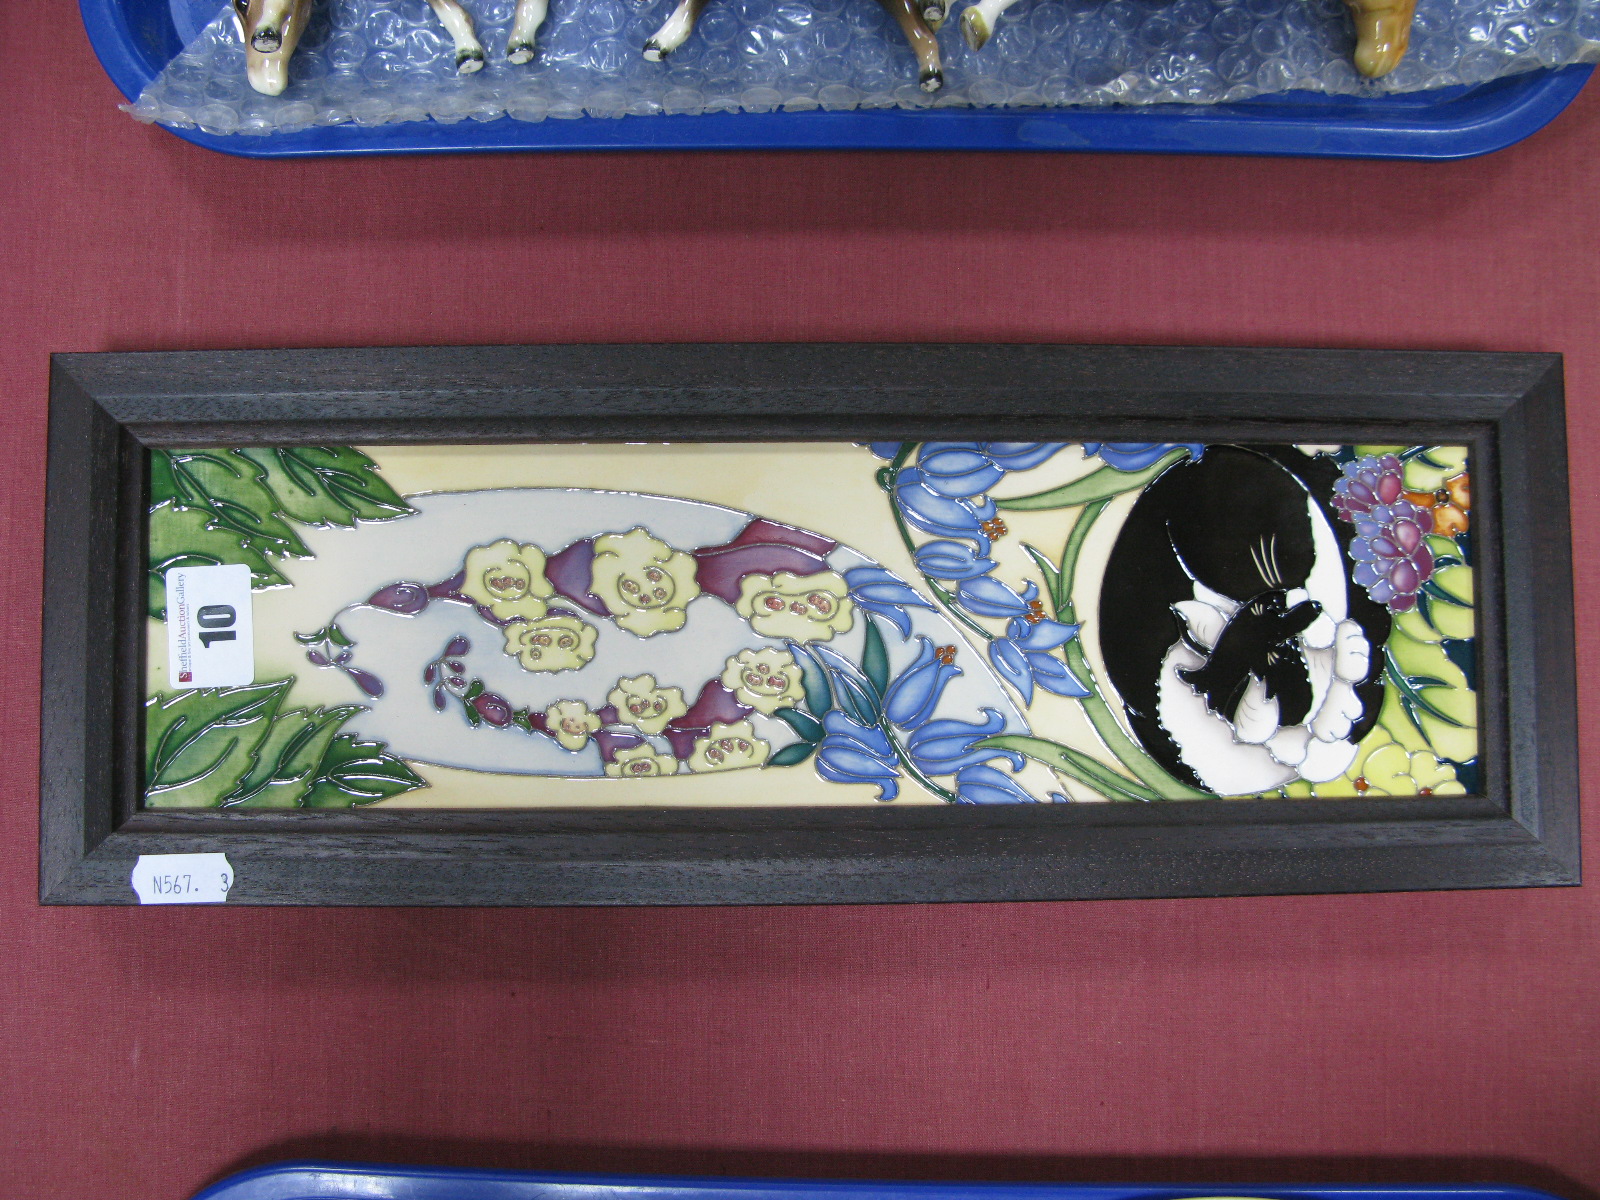 A Moorcroft Pottery Plaque 'Black Catnap', numbered edition 146, designed by Rachel Bishop, 34 x